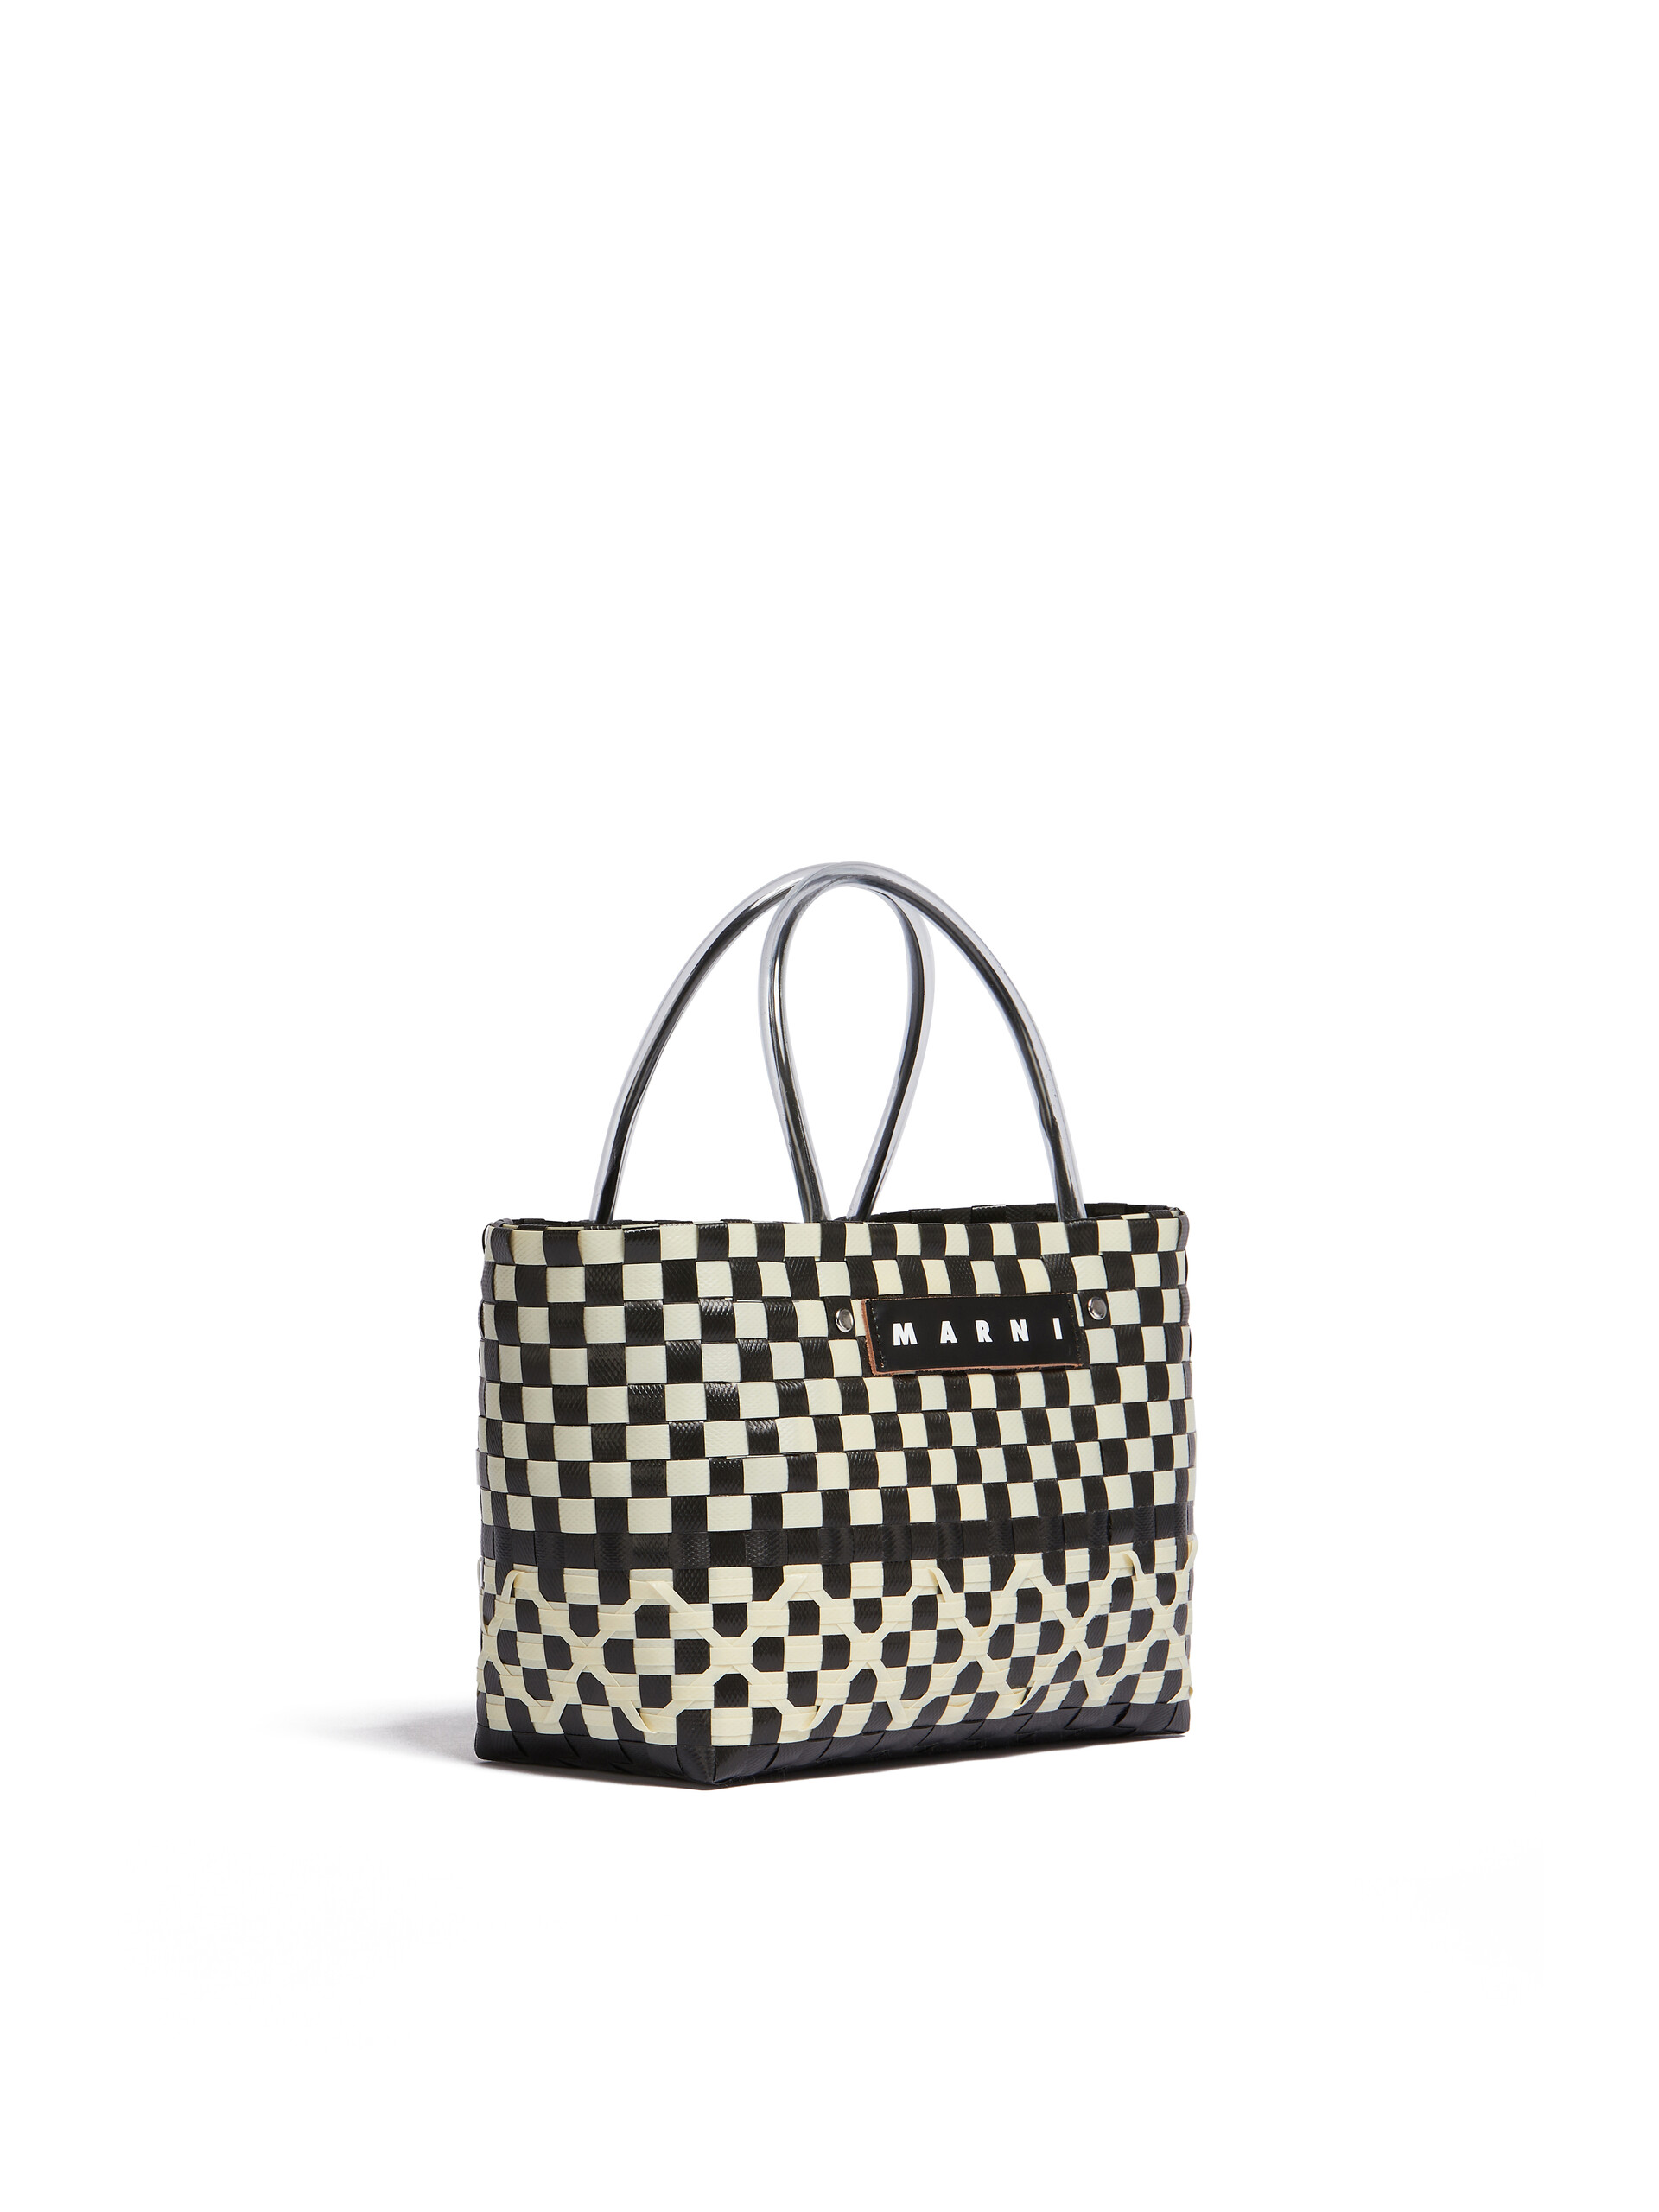 Blue and red woven MARNI MARKET OVAL bag - Shopping Bags - Image 2